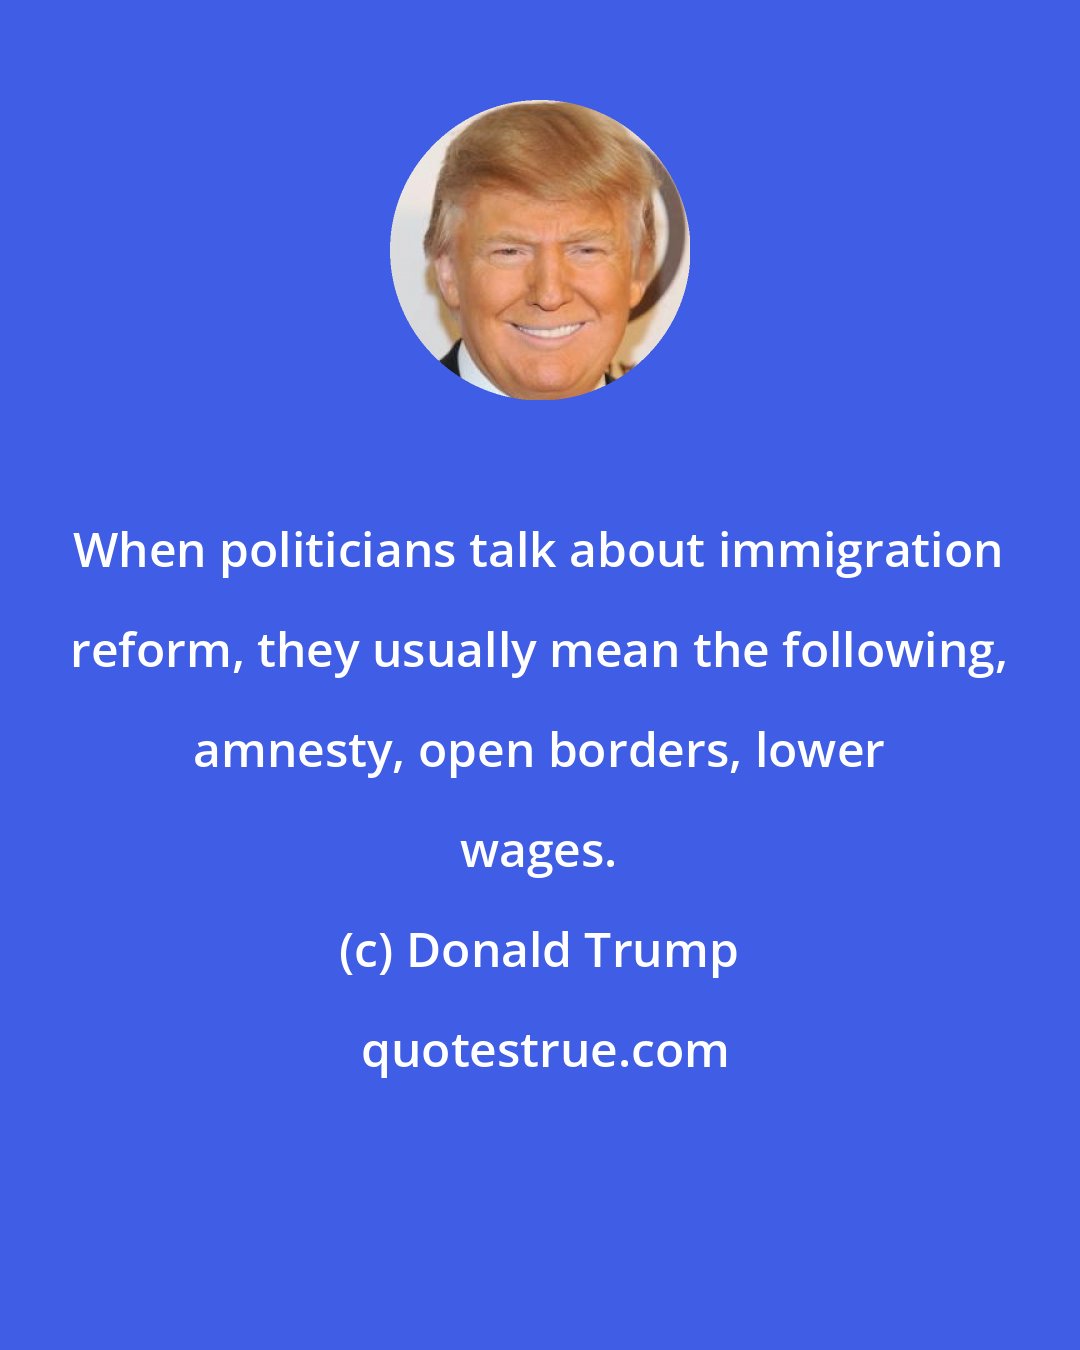 Donald Trump: When politicians talk about immigration reform, they usually mean the following, amnesty, open borders, lower wages.